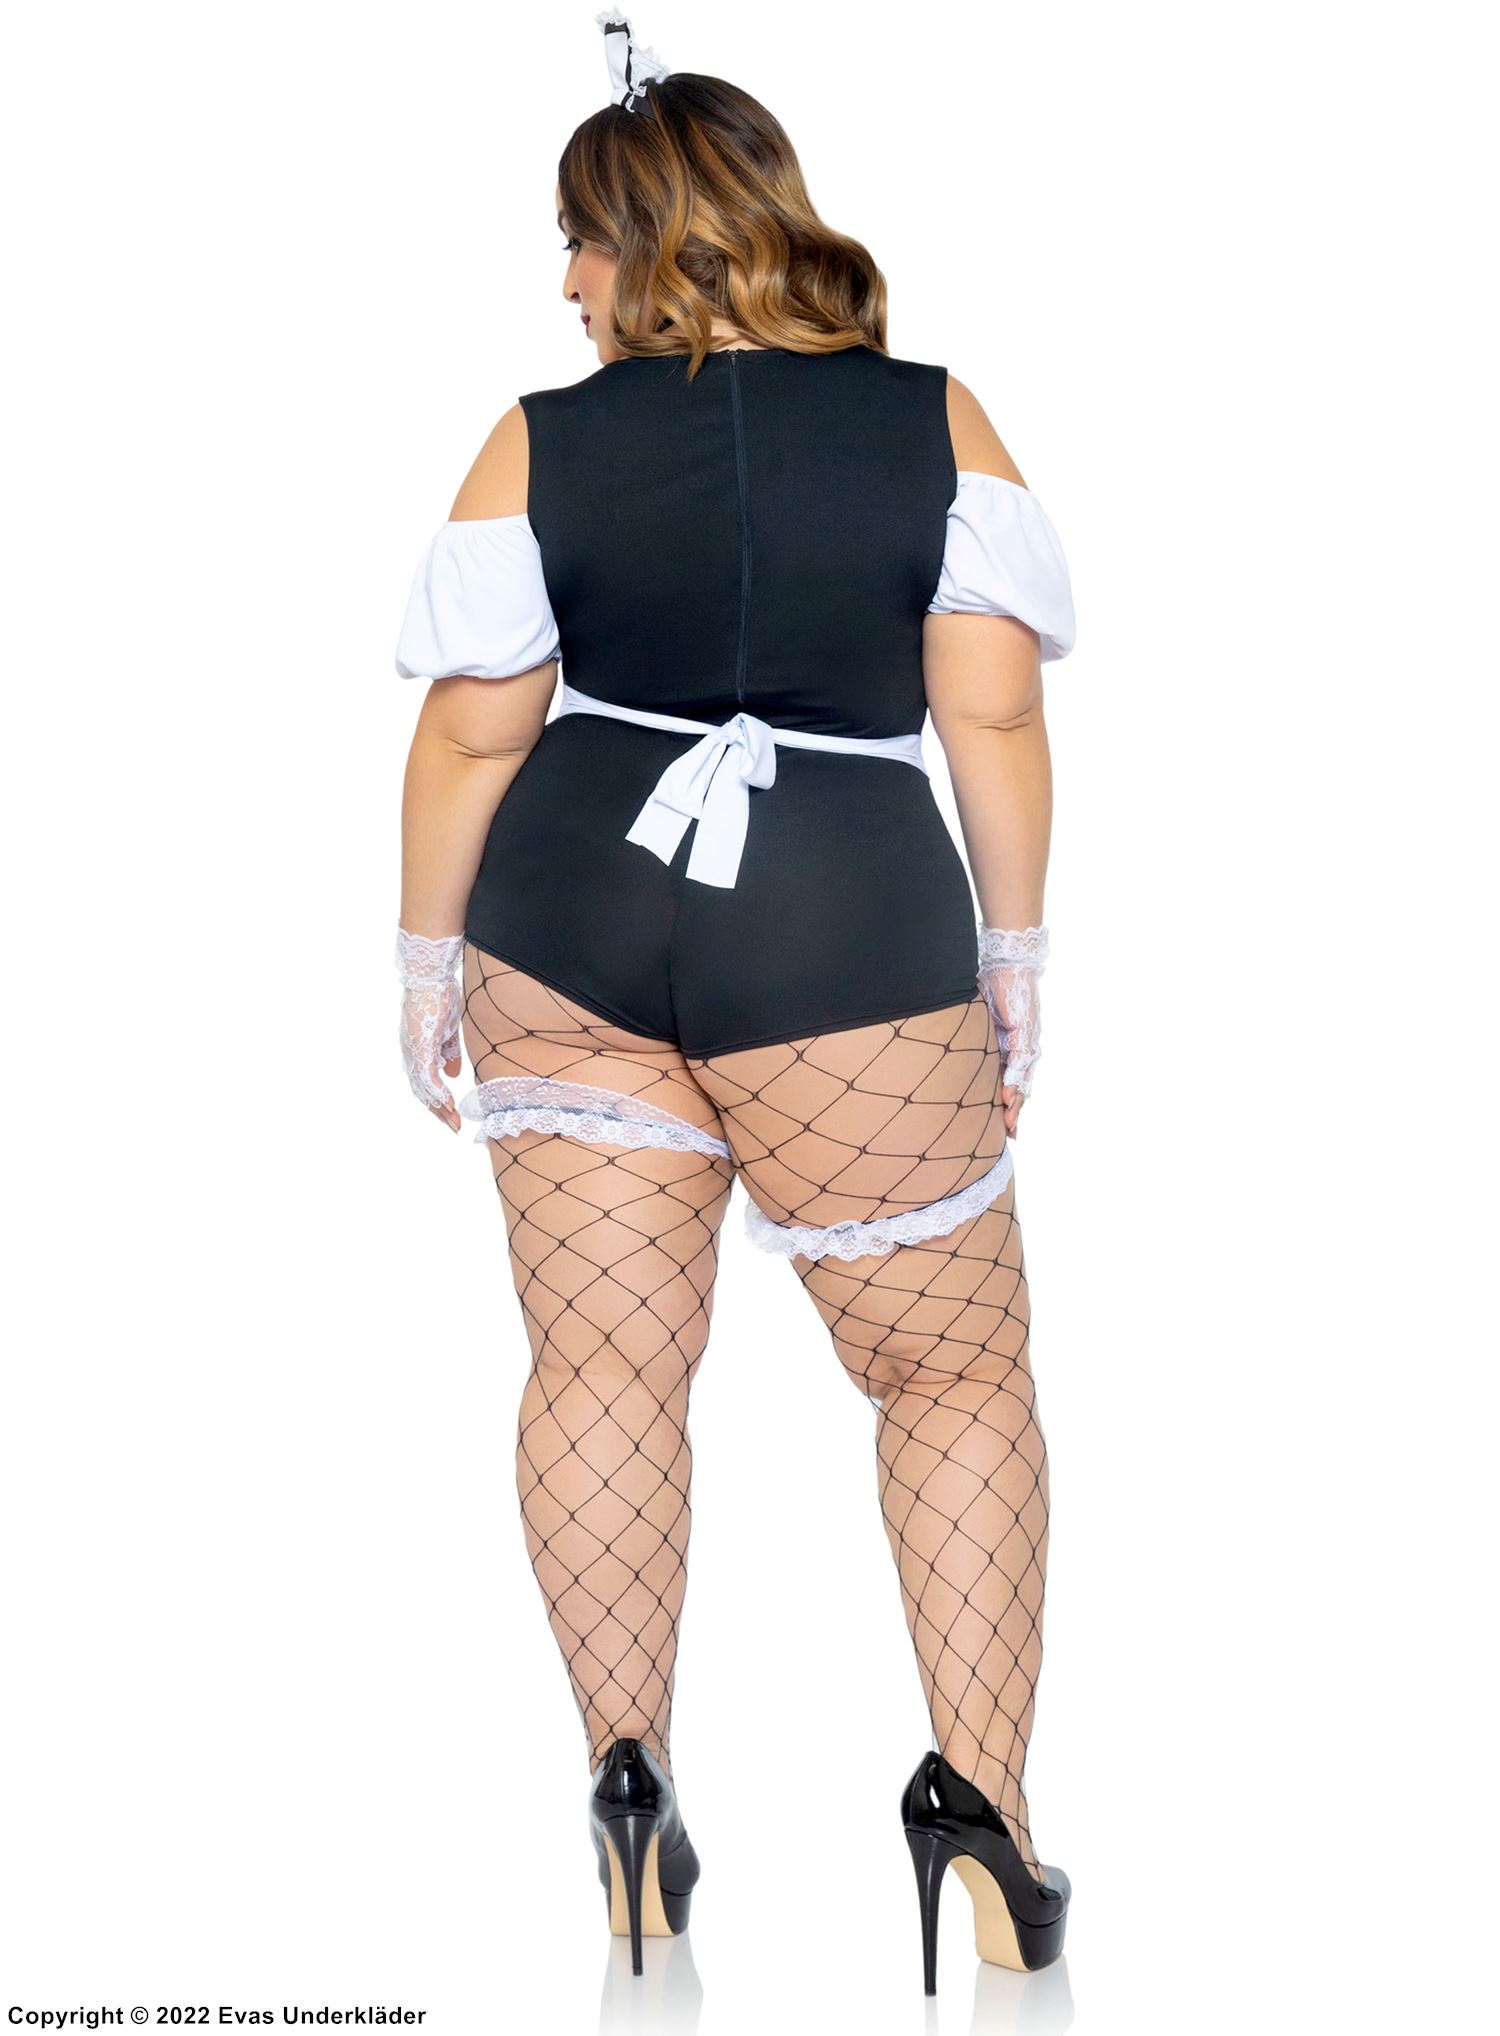 French maid, teddy costume, ruffle trim, wrinkles, cold shoulder, apron, built-in garters, plus size